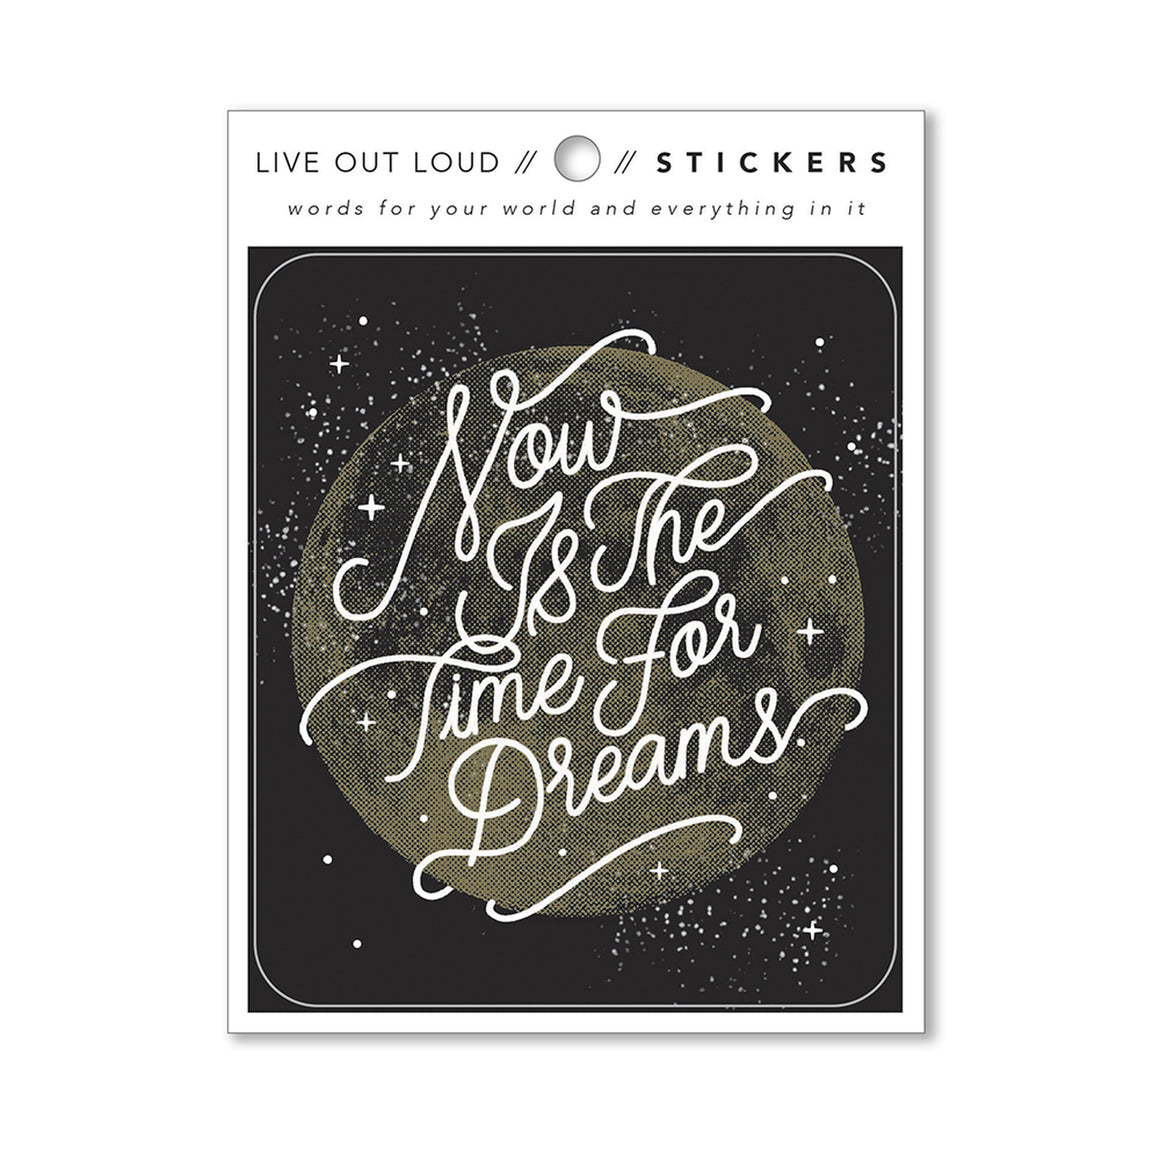 Sticker | Now is the Time for Dreams